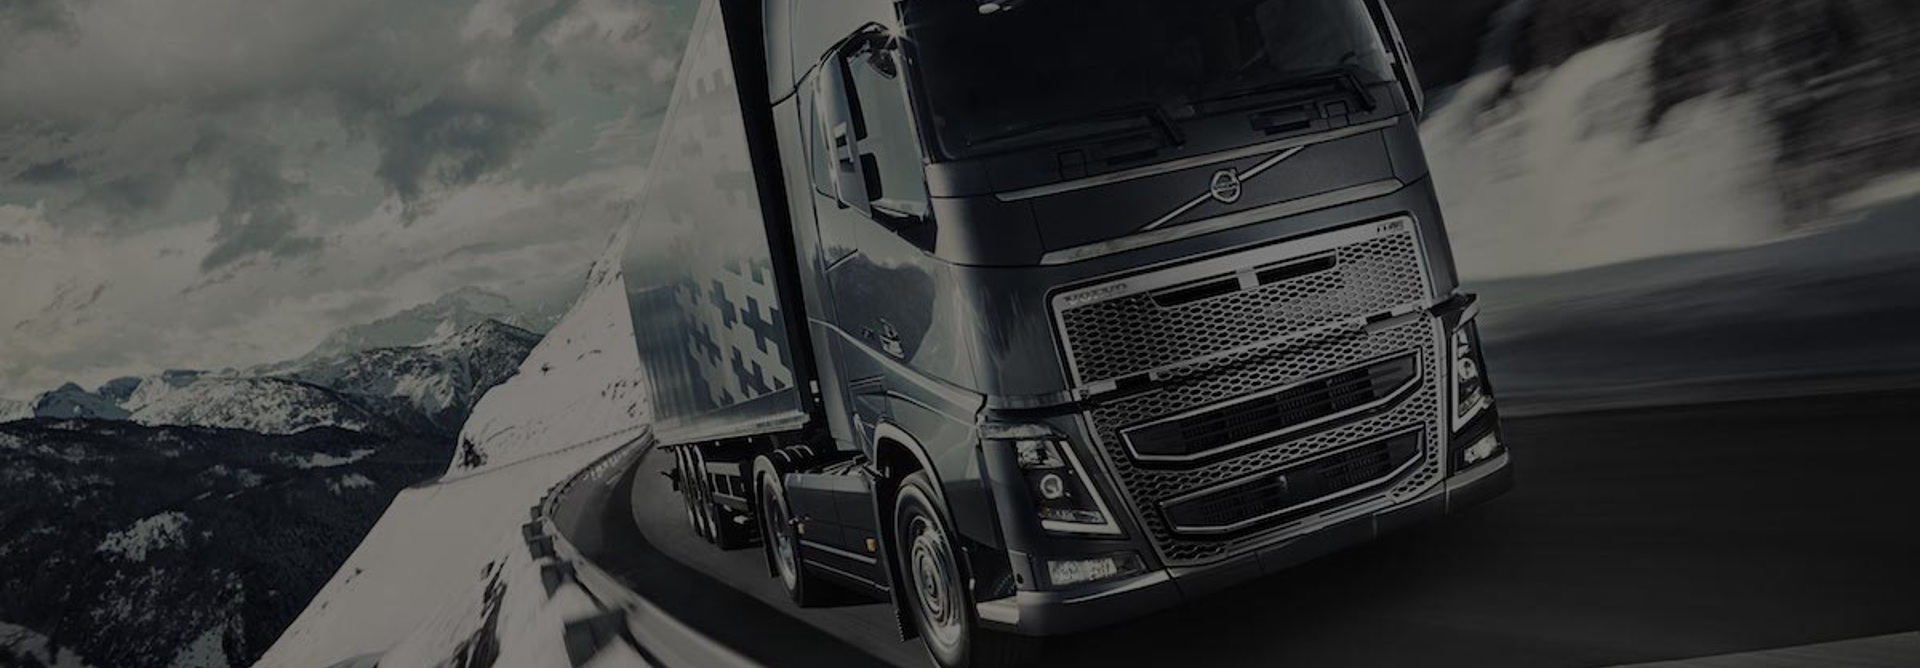 UNBEATABLE TRUCKING AND TRANSPORT SERVICES